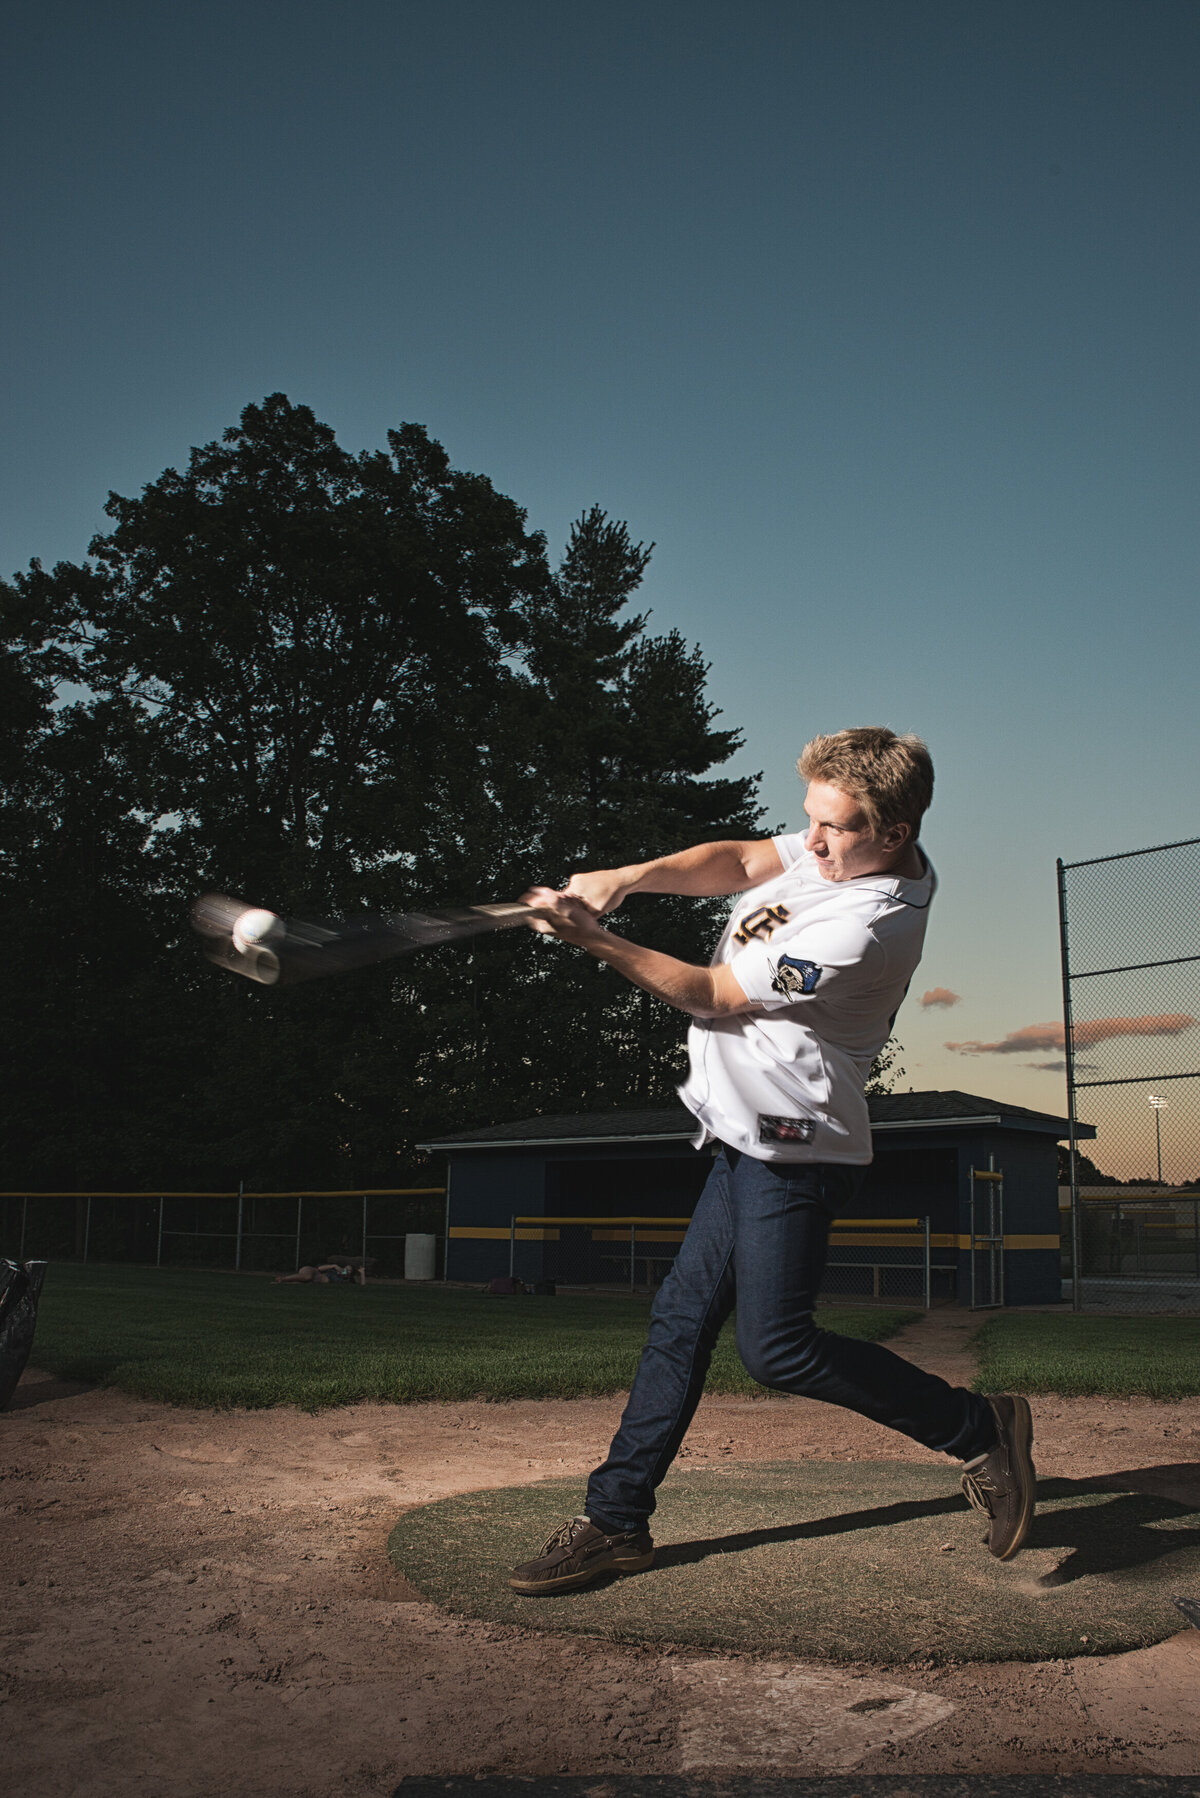 Grand-Rapids-MI-Sports-and-Hobbies-Senior-Pictures-23